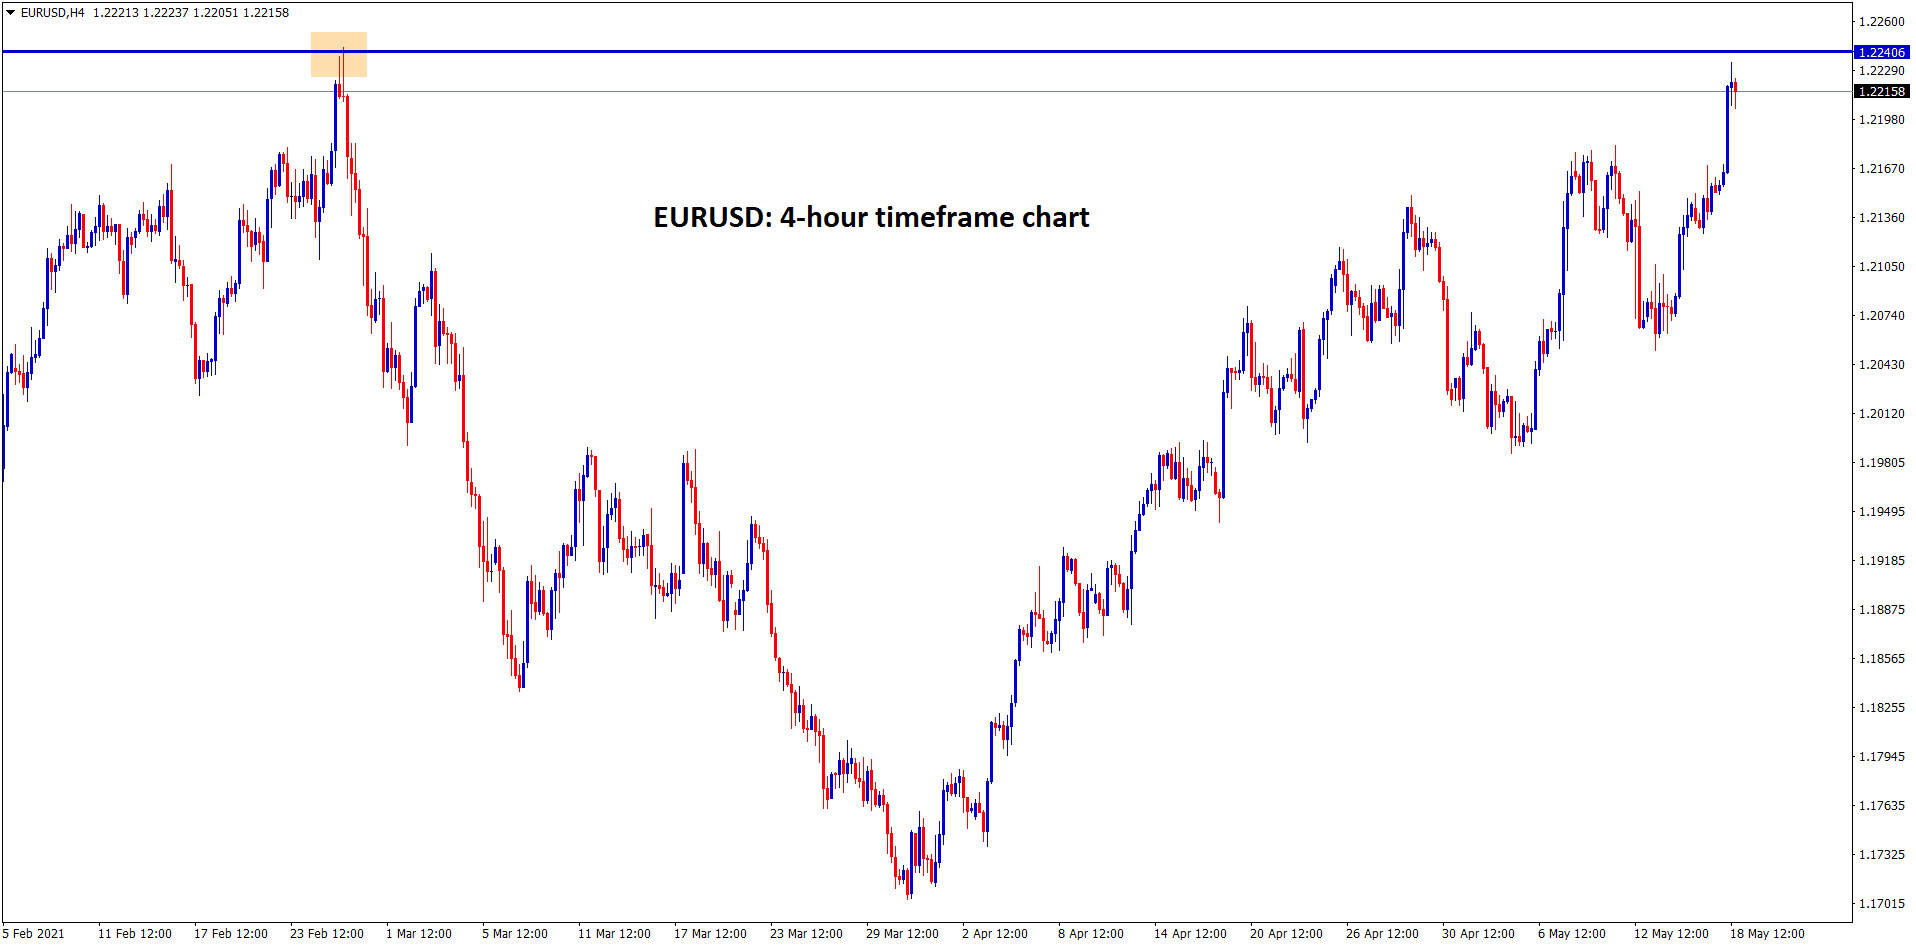 EURUSD is near to the top resistance level after 3 months.